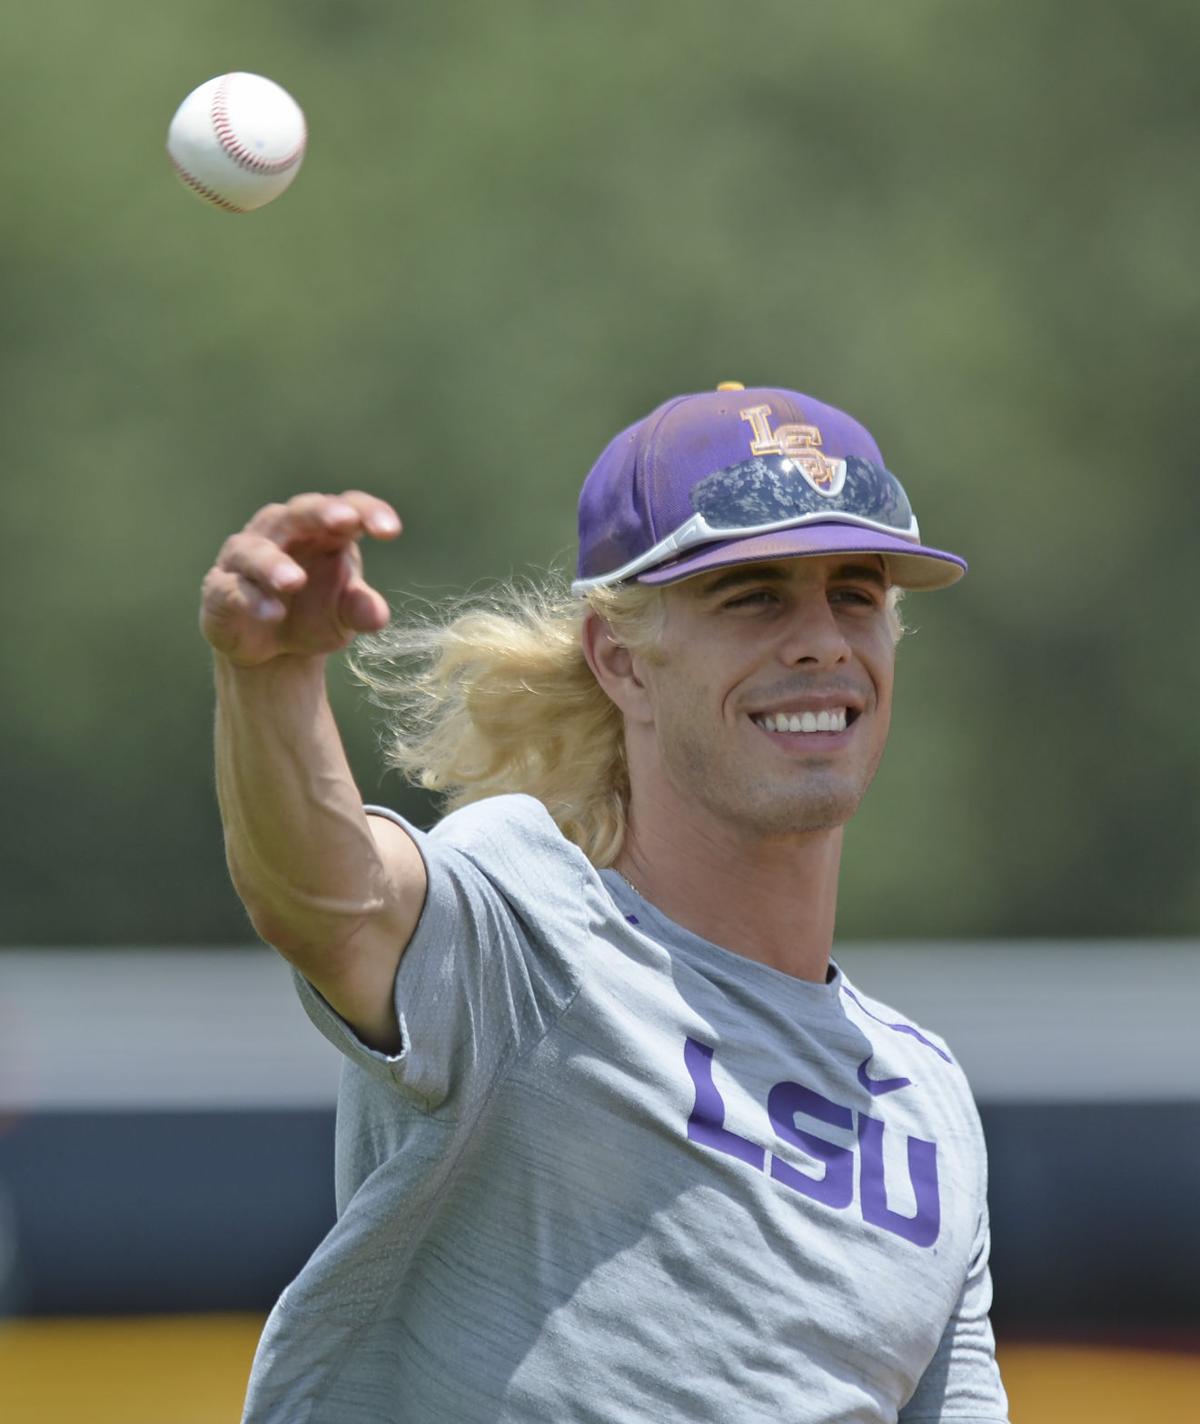 CWS notebook: LSU's 'fuddy-duddy' coach allows players wild hair to